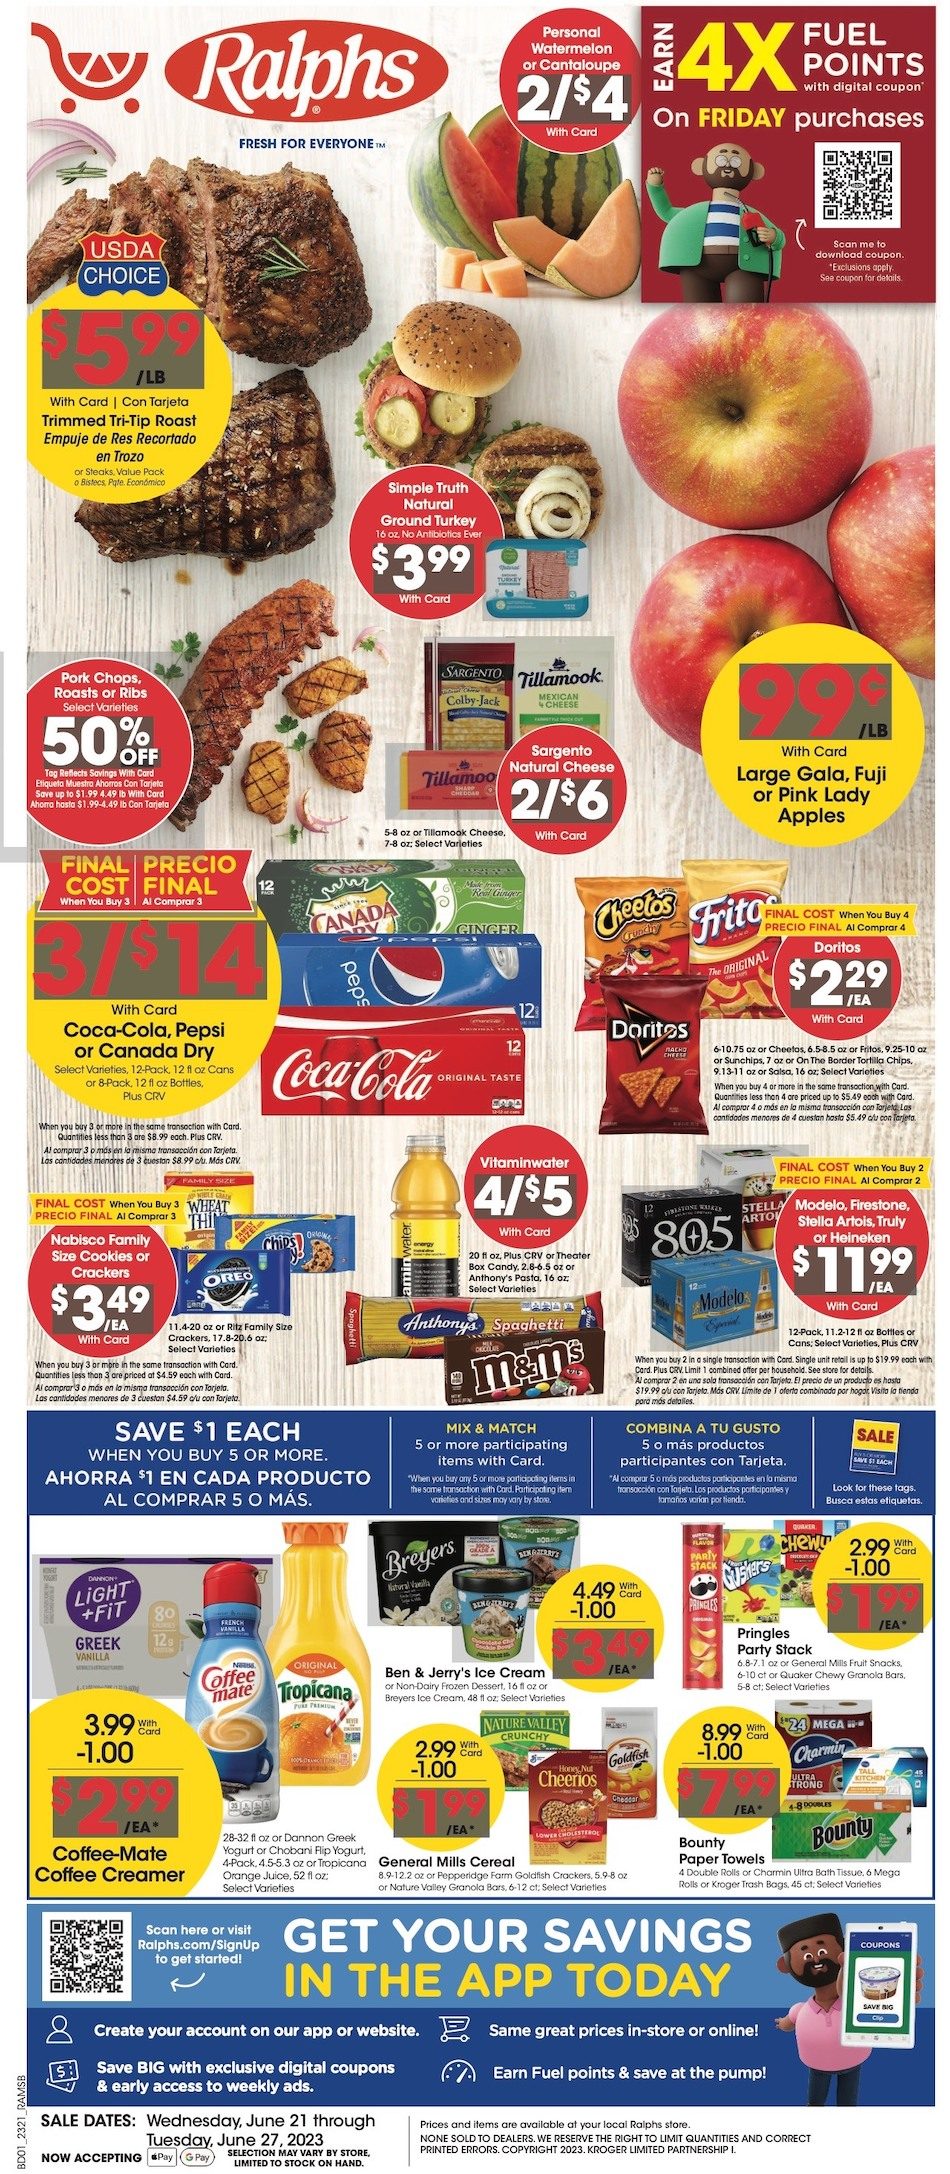 Ralphs Weekly Ad 21st – 27th June 2023 Page 1